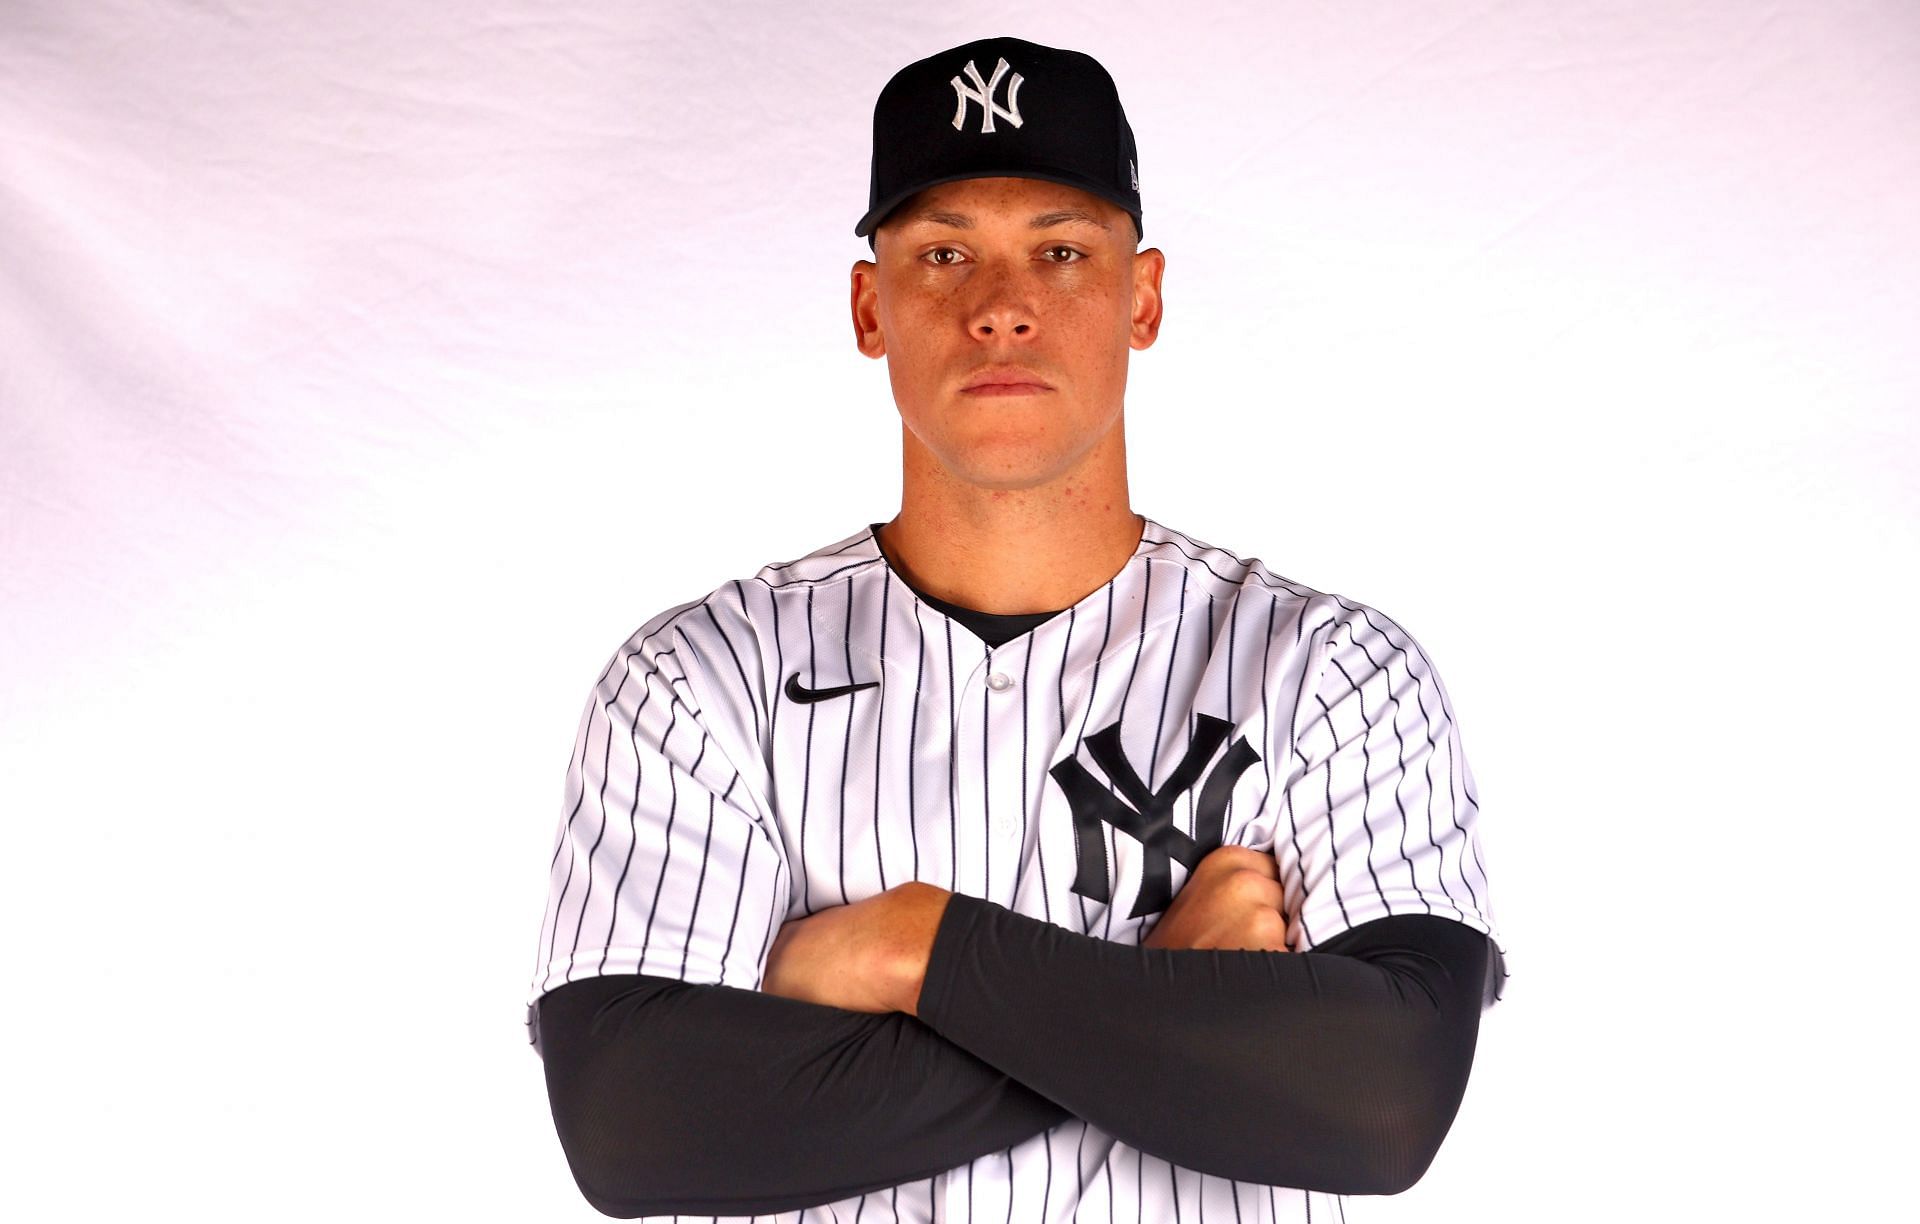 Aaron Judge is one of the biggest baseball players